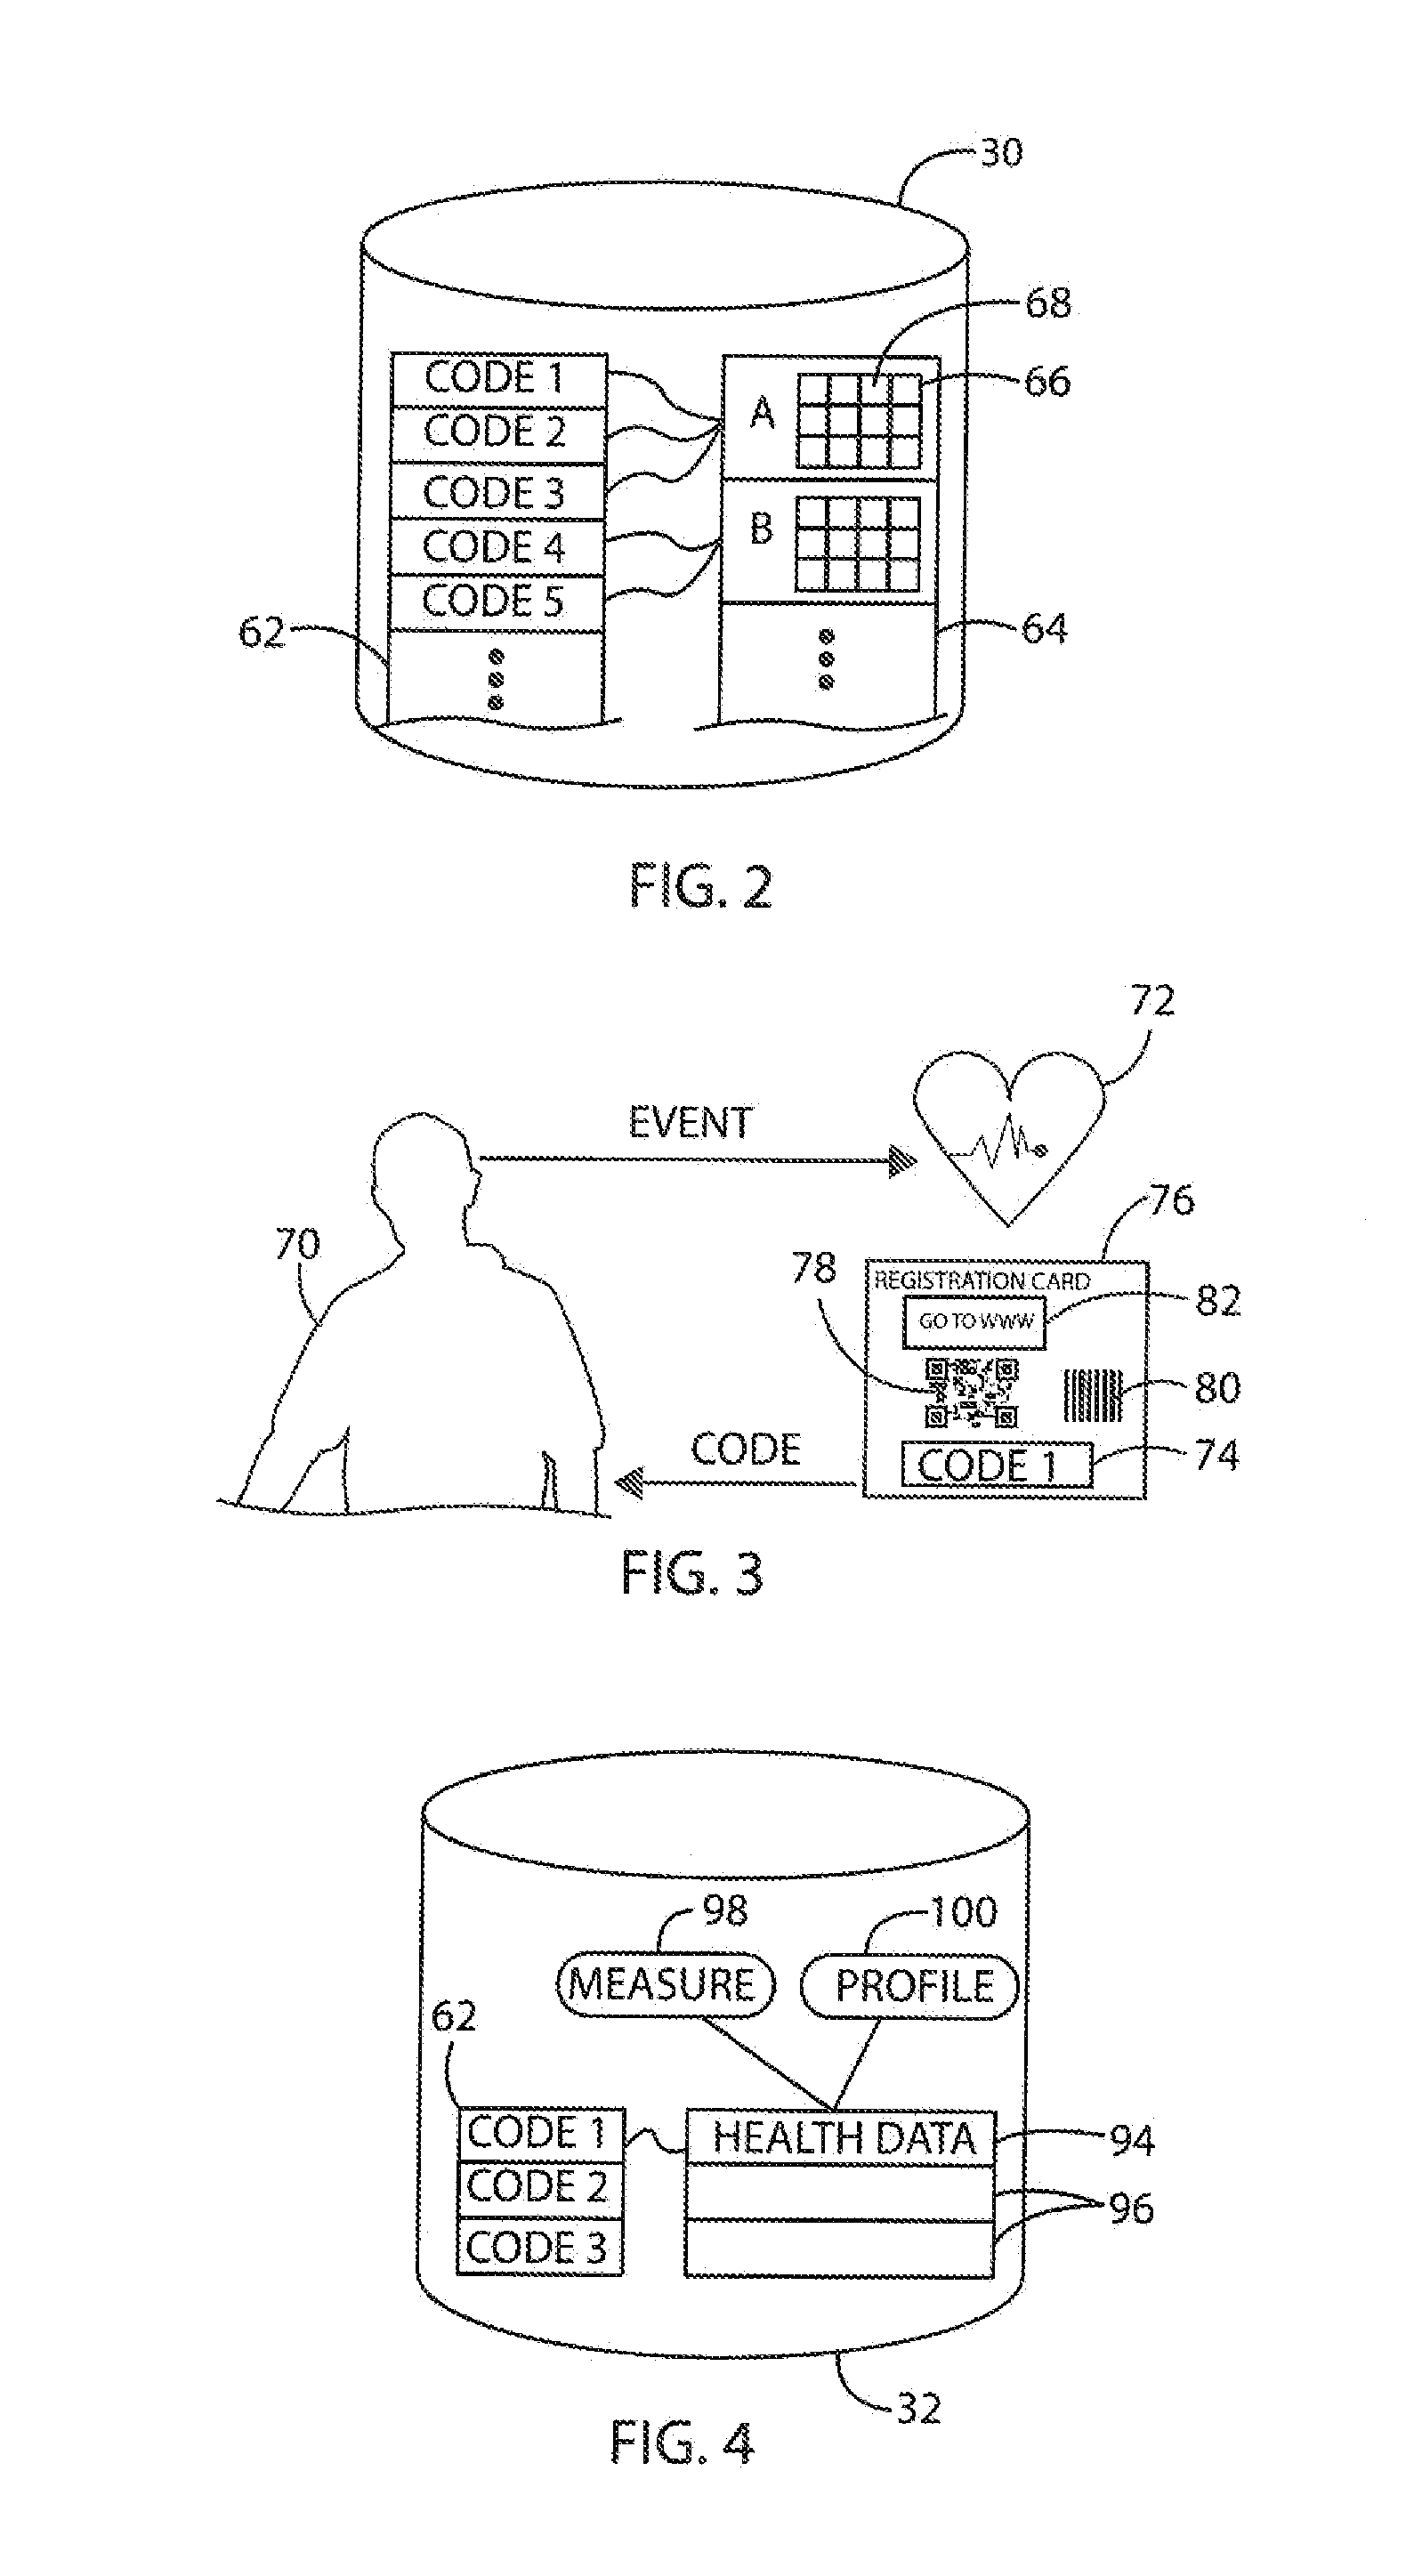 System for Electronically Administering Health Services